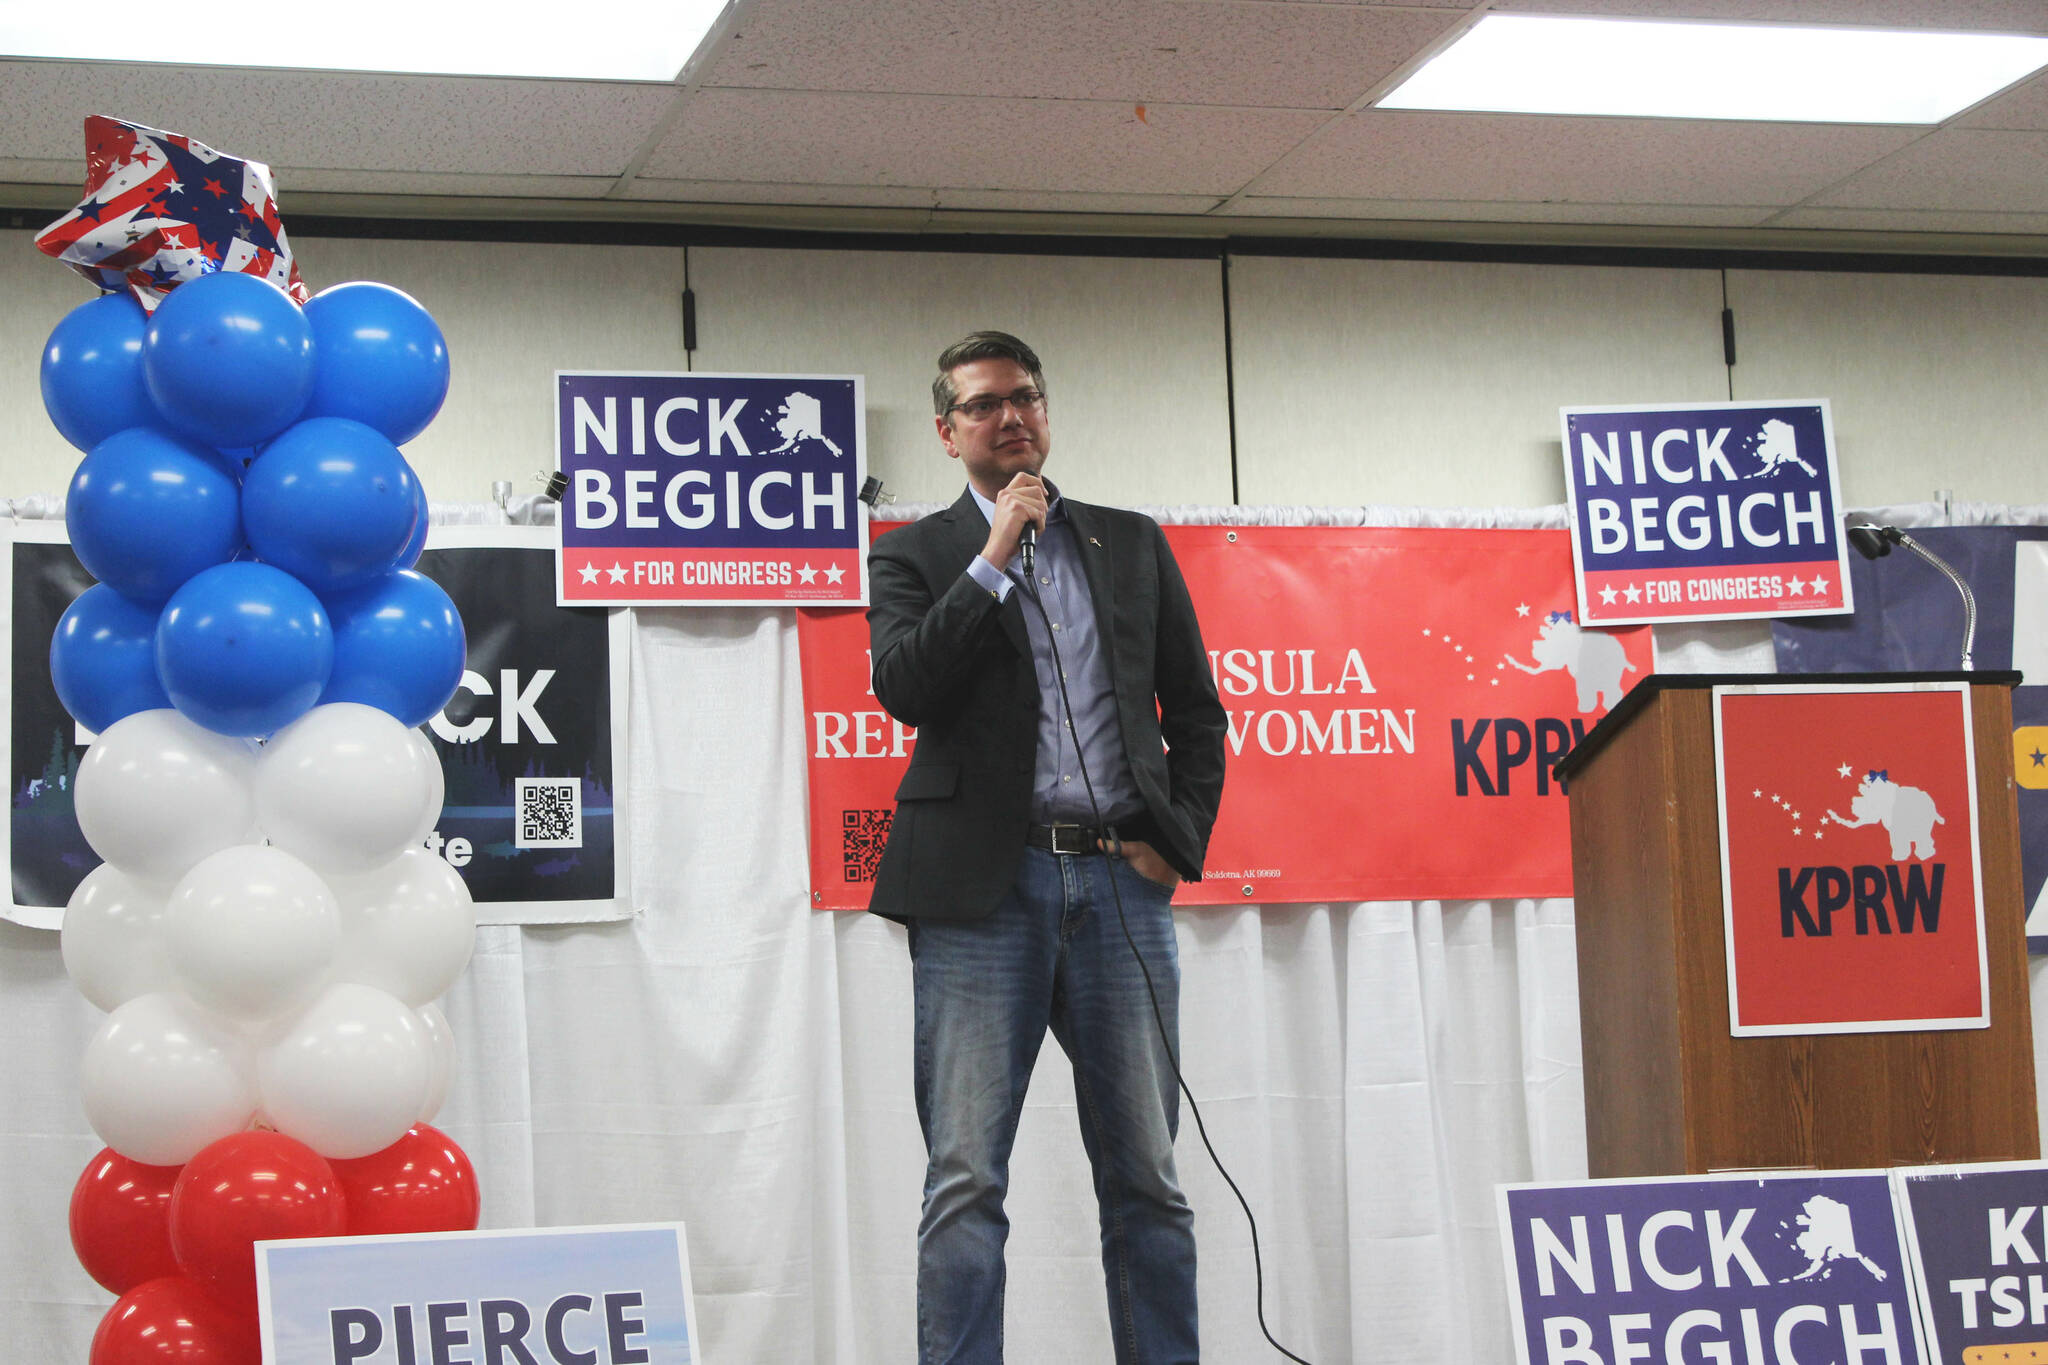 Republican U.S. House candidate Nick Begich III speaks at a “Get Out the Vote” rally hosted by the Kenai Peninsula Republican Women at the Soldotna Regional Sports Complex on Tuesday, Oct. 18, 2022, in Soldotna, Alaska. (Ashlyn O’Hara/Peninsula Clarion)